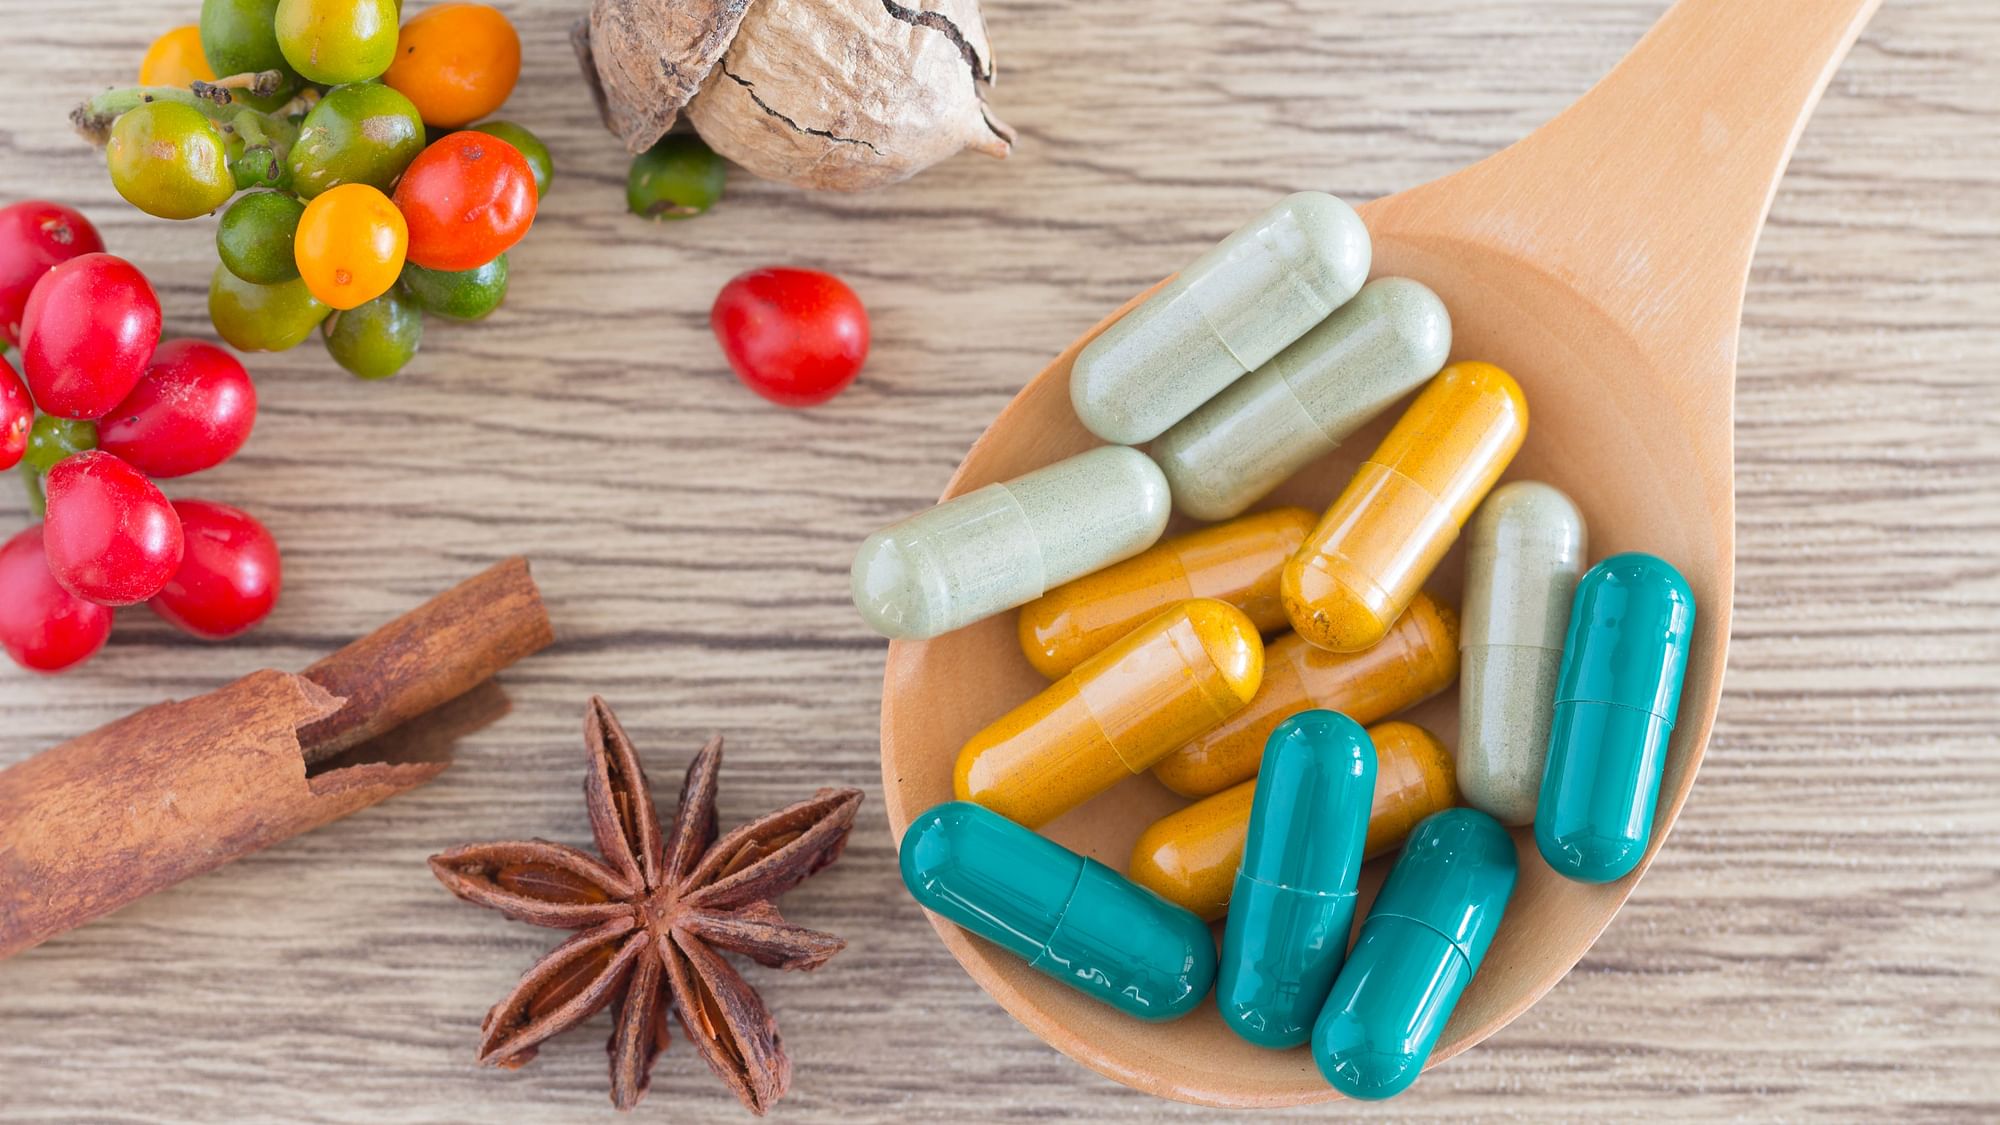 Do men and women need different supplements? What are the harms of a too much vitamin C? Take the FitQuiz to find out more.